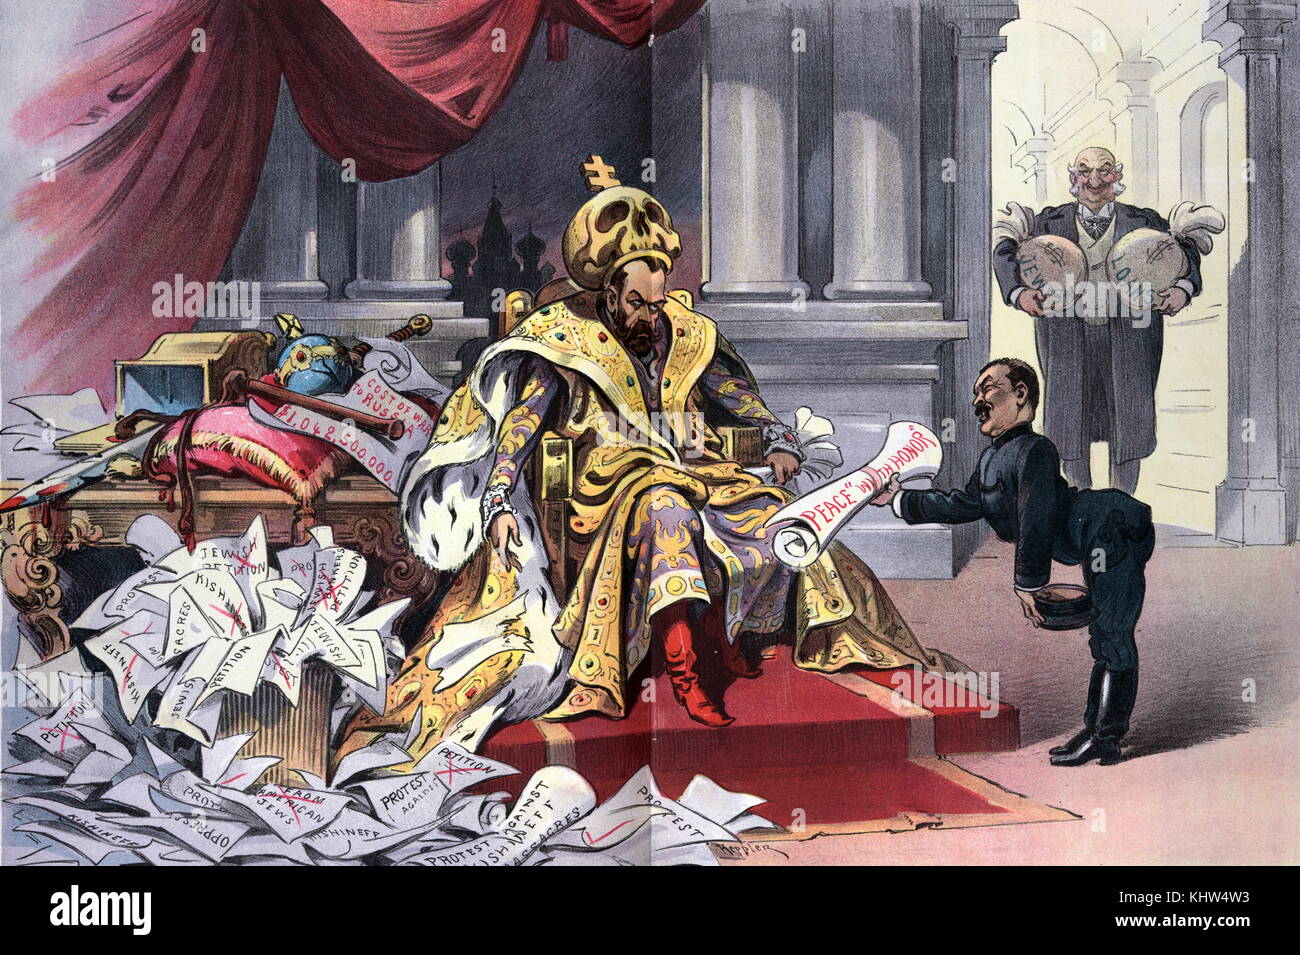 Illustration titled 'Kishineff must be paid for - with interest'. The illustration depicts Tsar Nicholas II of Russia (1868-1918) sitting on a throne, wearing a large skull topped with a cross as a crown; a Japanese man is offering him papers labelled 'Peace ' with Honour' ' and a Jewish man, holding bags labelled 'Jewish Loans' is standing in a palace doorway in the background. There is an overflowing basket of papers labelled 'Jewish Petition [and] Protest against Kishineff Massacres' piling up on the floor. A paper on a desk states 'Cost of War to Russia $1,042,500,000'. Stock Photo